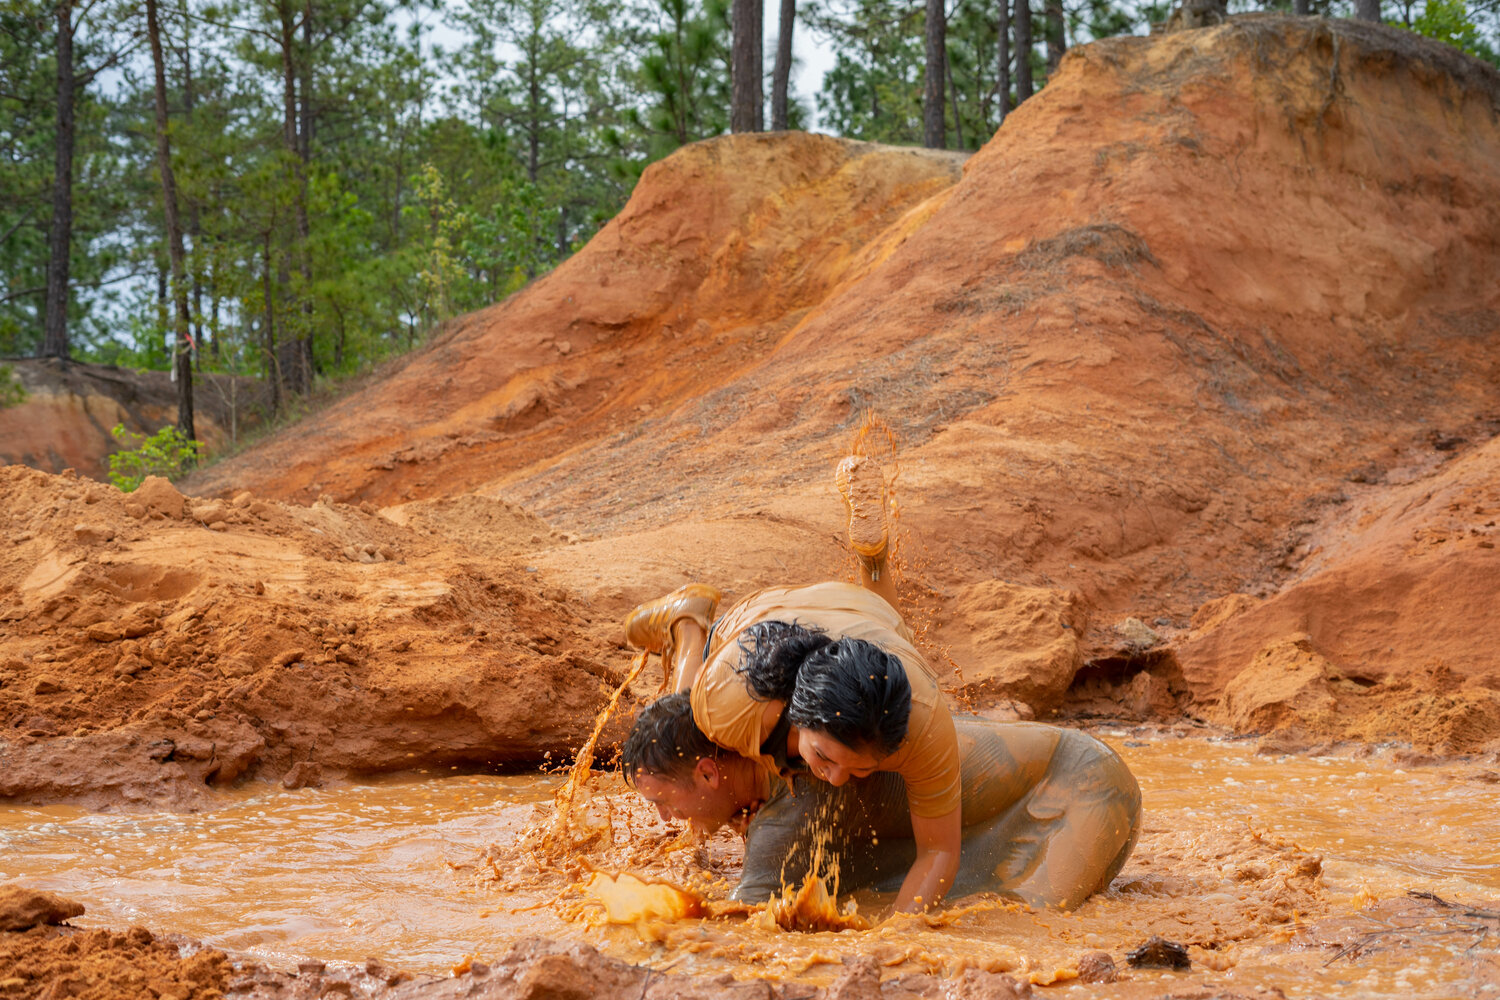 Cole Shumway and Nathaly Shumway participate in Fort Bragg's Mud Run on April 22 at McKellar's Lodge.